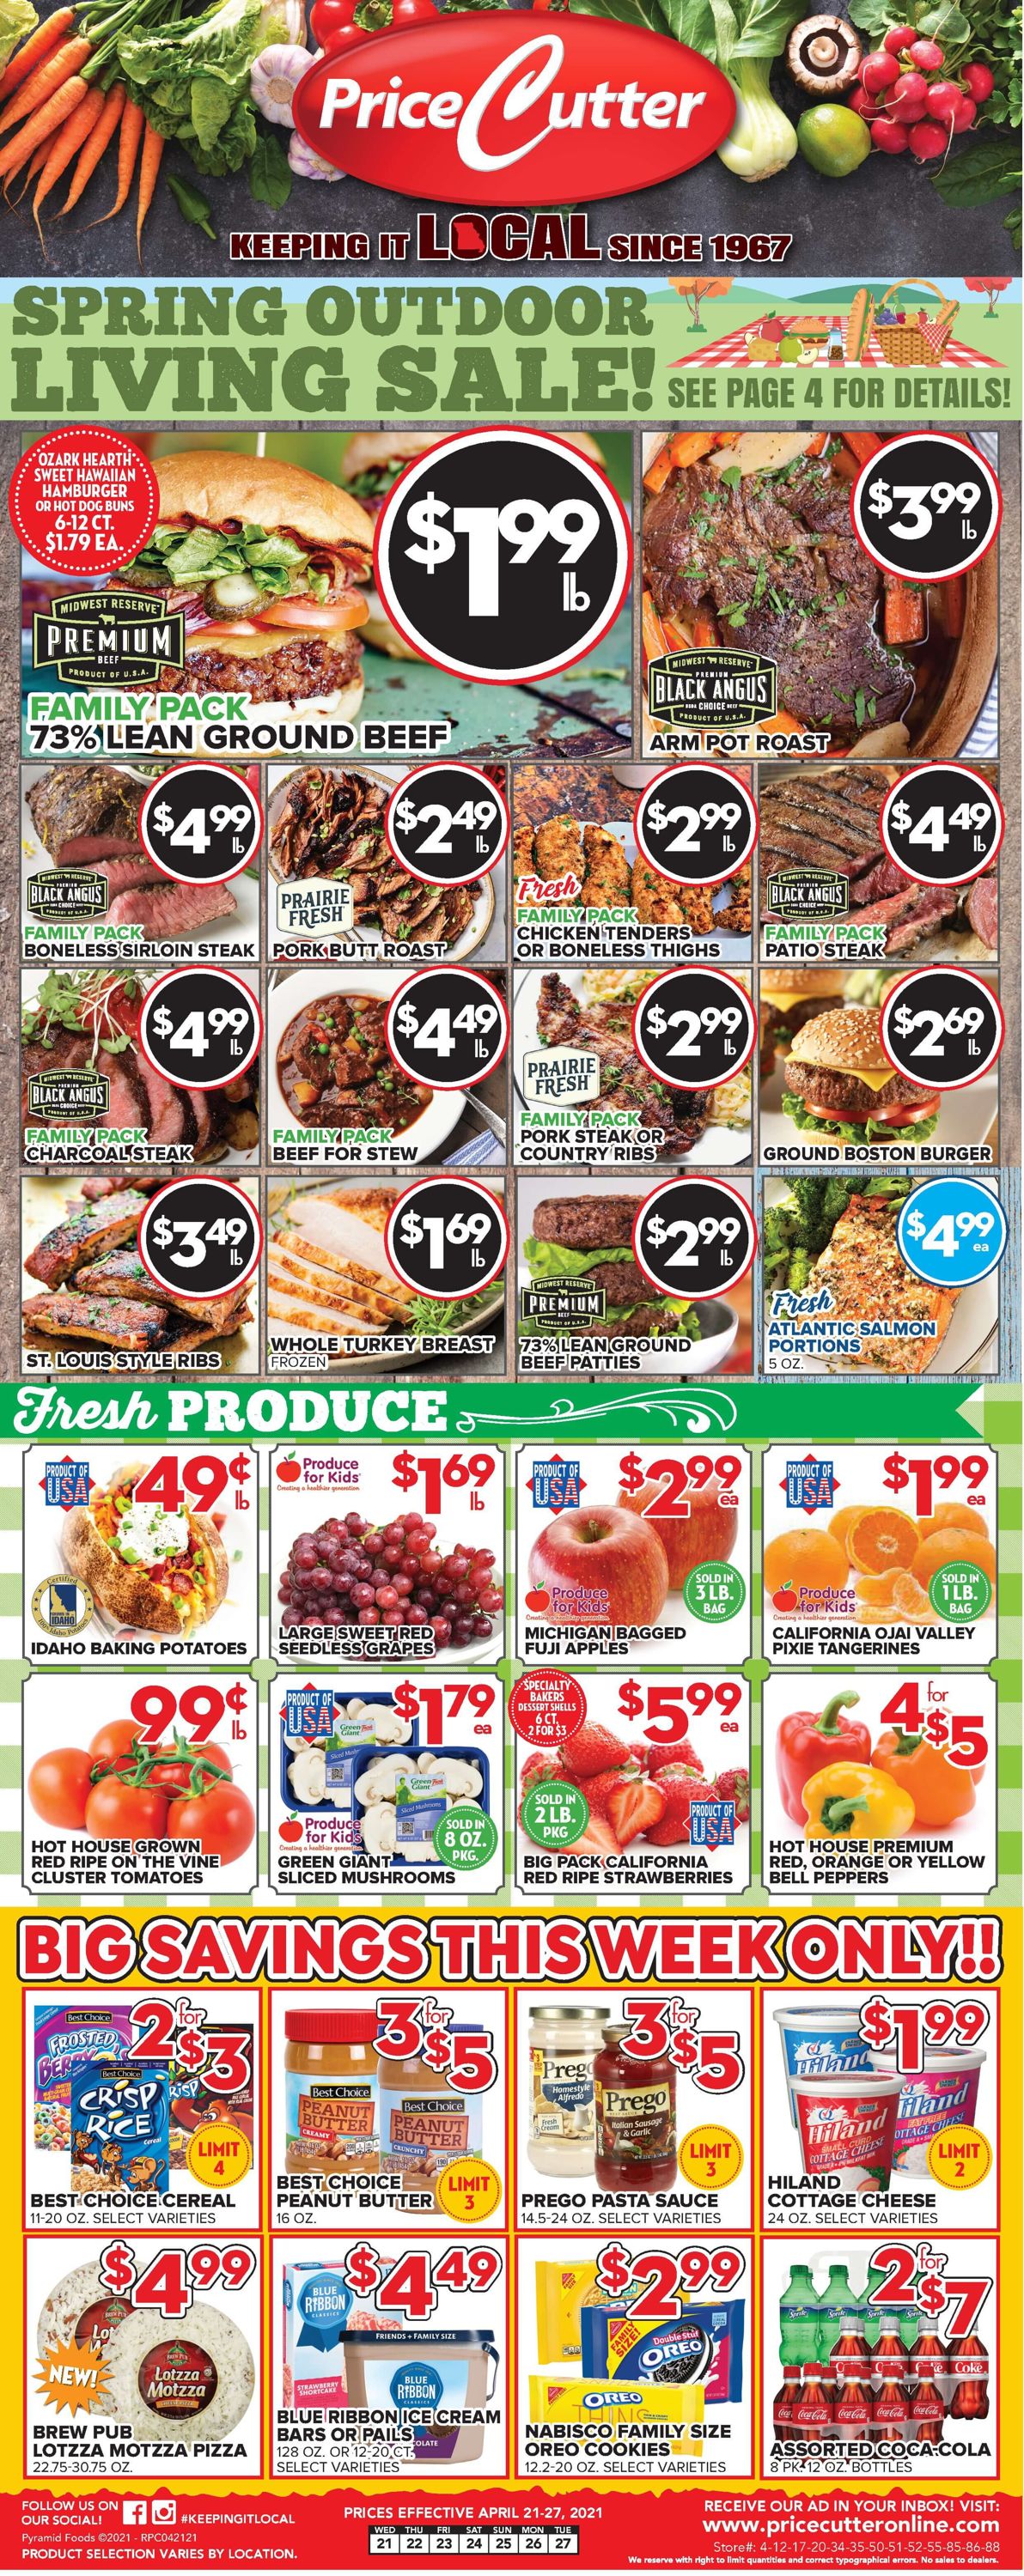 Price Cutter Weekly Ad Circular - valid 04/21-04/27/2021